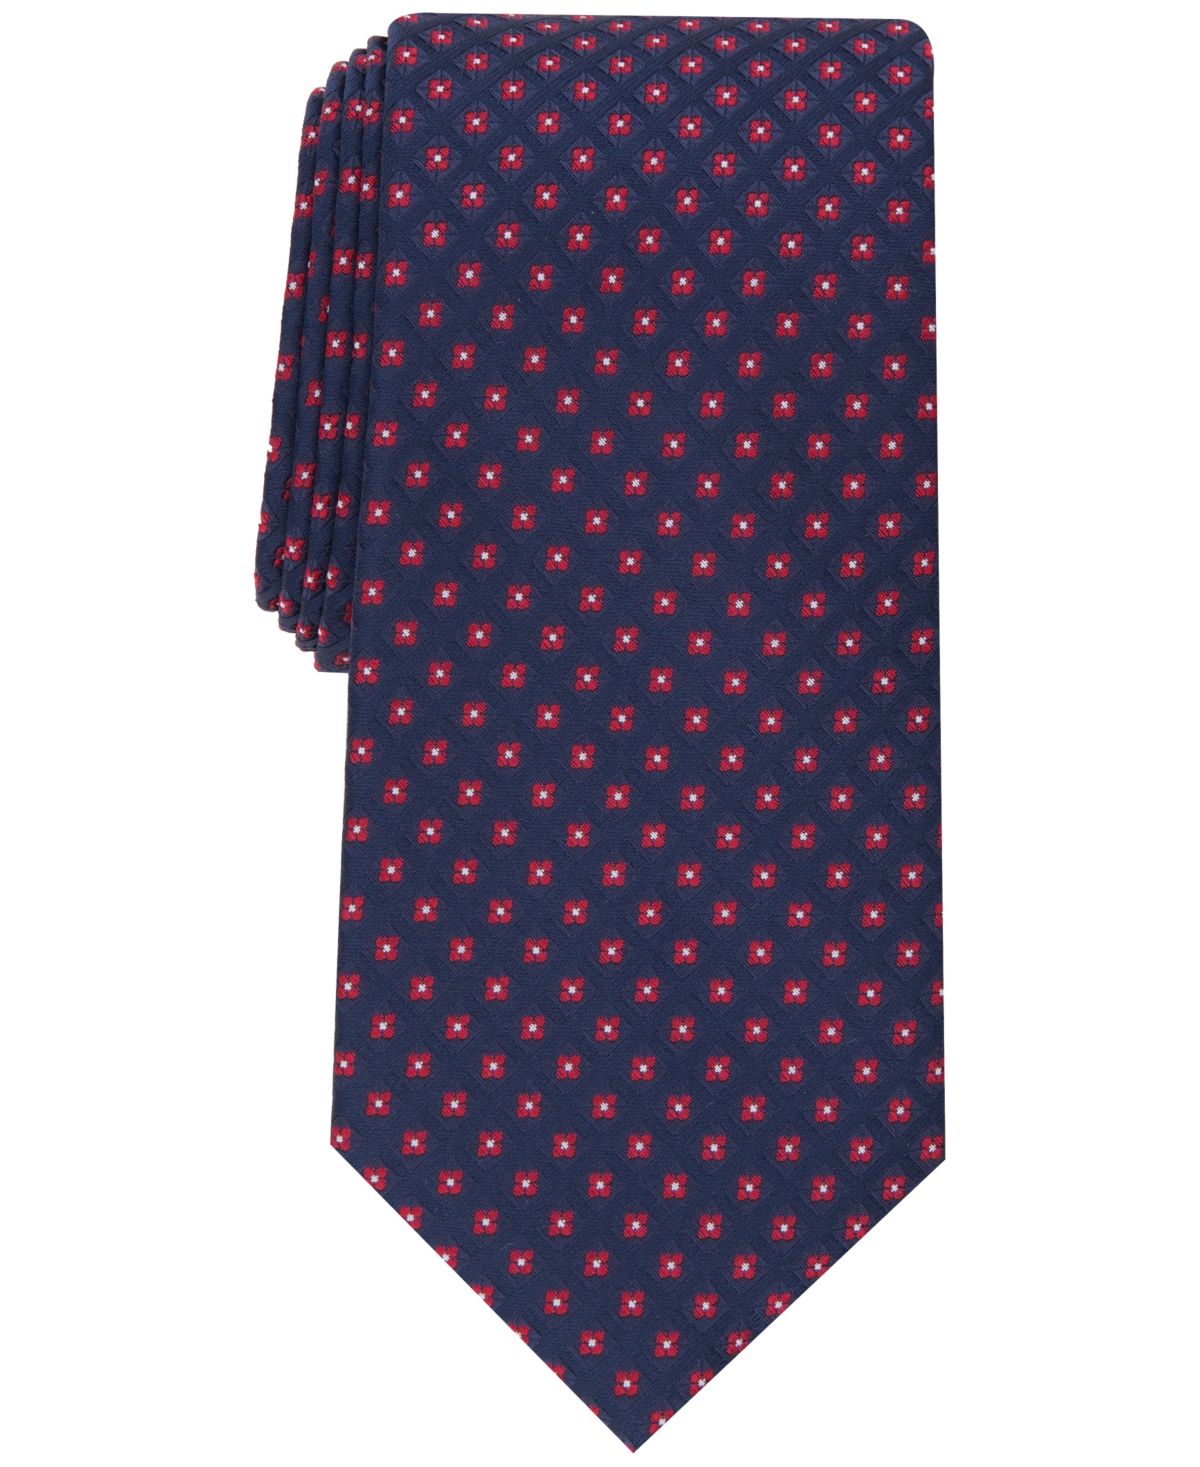 Men's Classic Neat Tie, Created for Macy's - Red